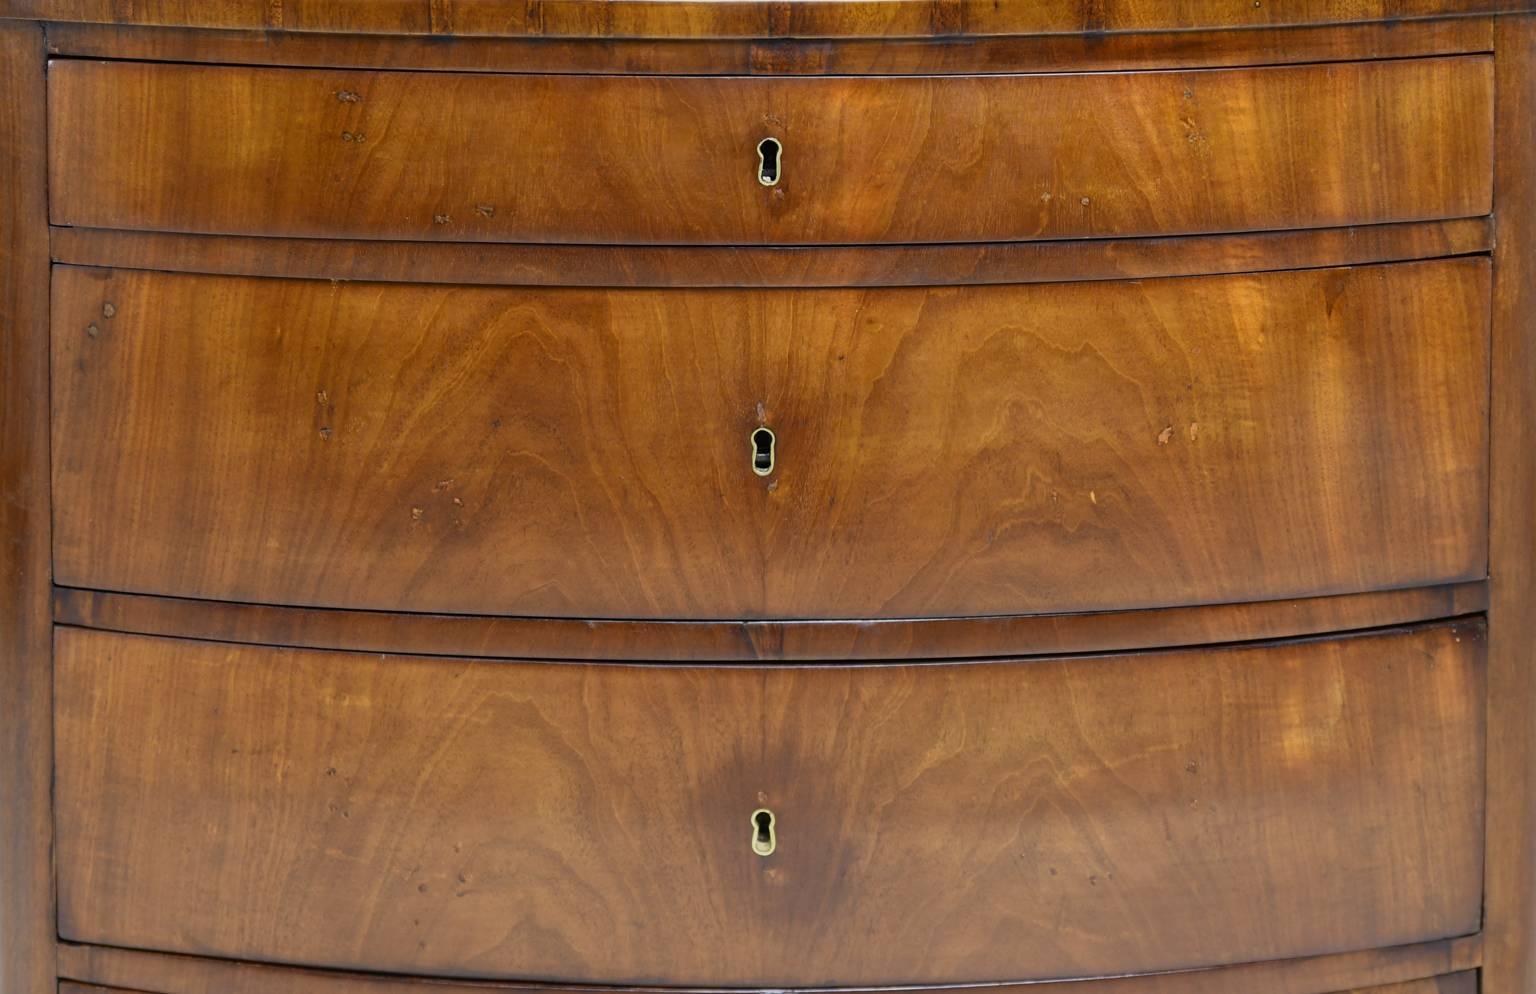 Polished Small Antique Biedermeier Chest of Drawers in Mahogany, Denmark, circa 1830